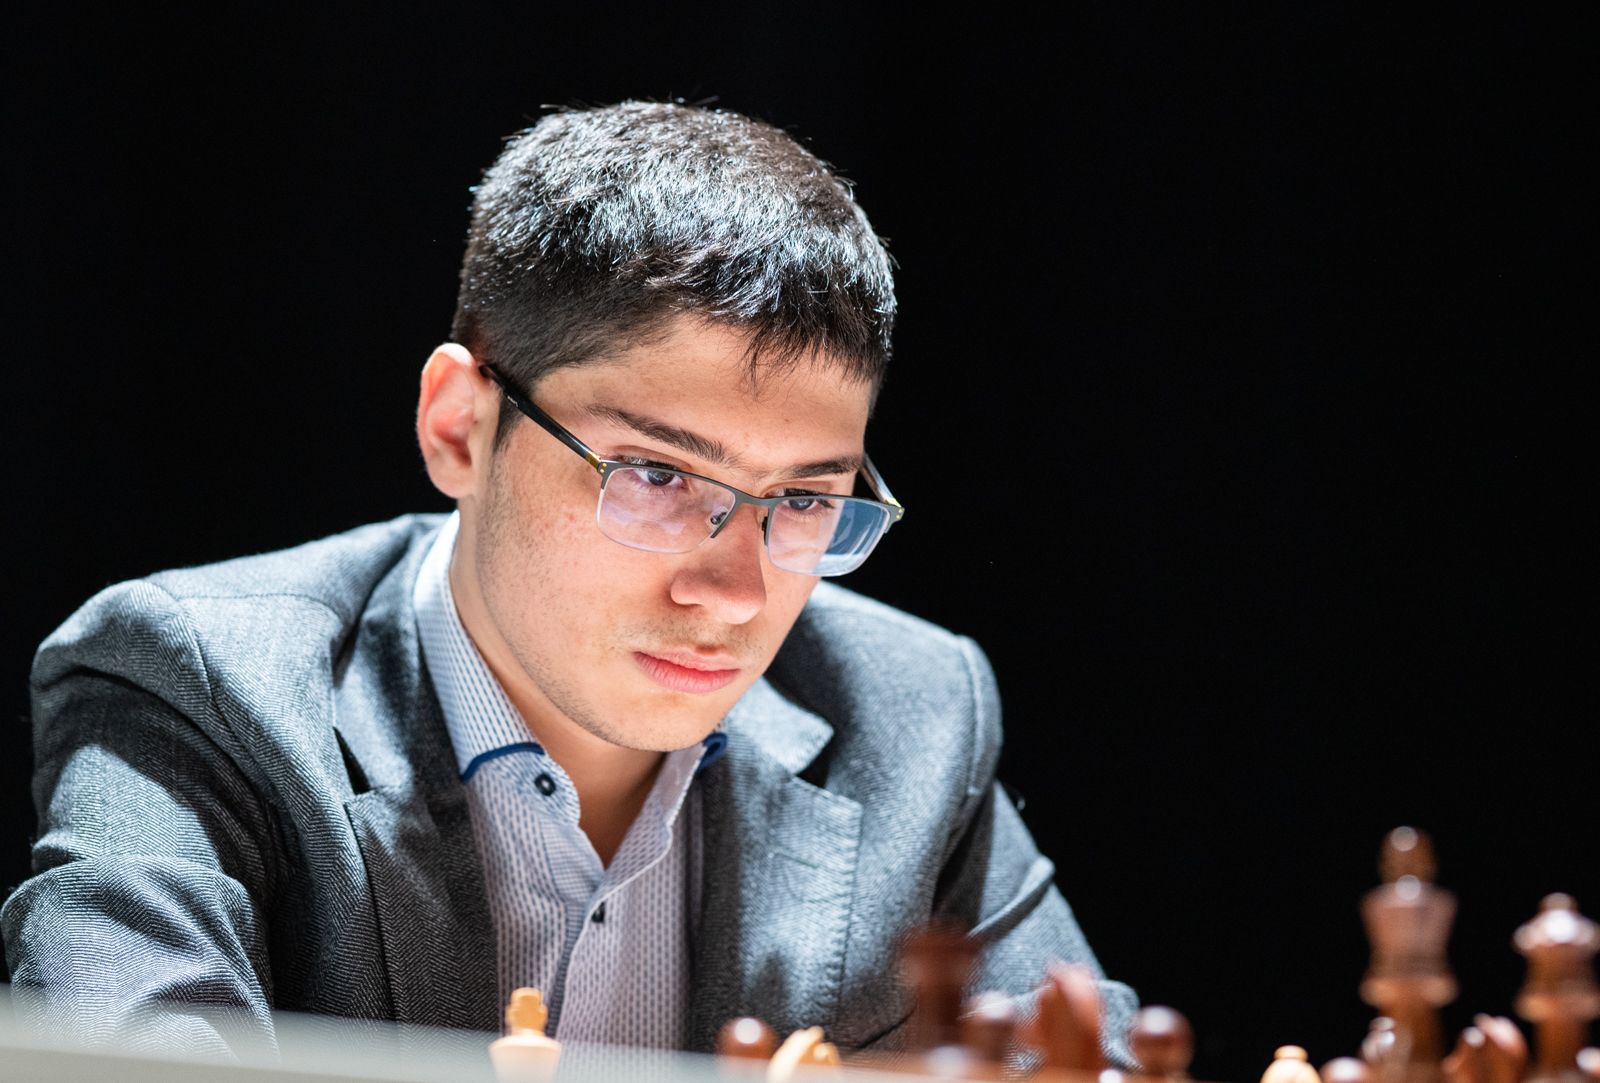 Are chess prodigy Firouzja Alireza's chess accomplishments, at the age of  16, more impressive than Magnus Carlsen's at the same age? - Quora